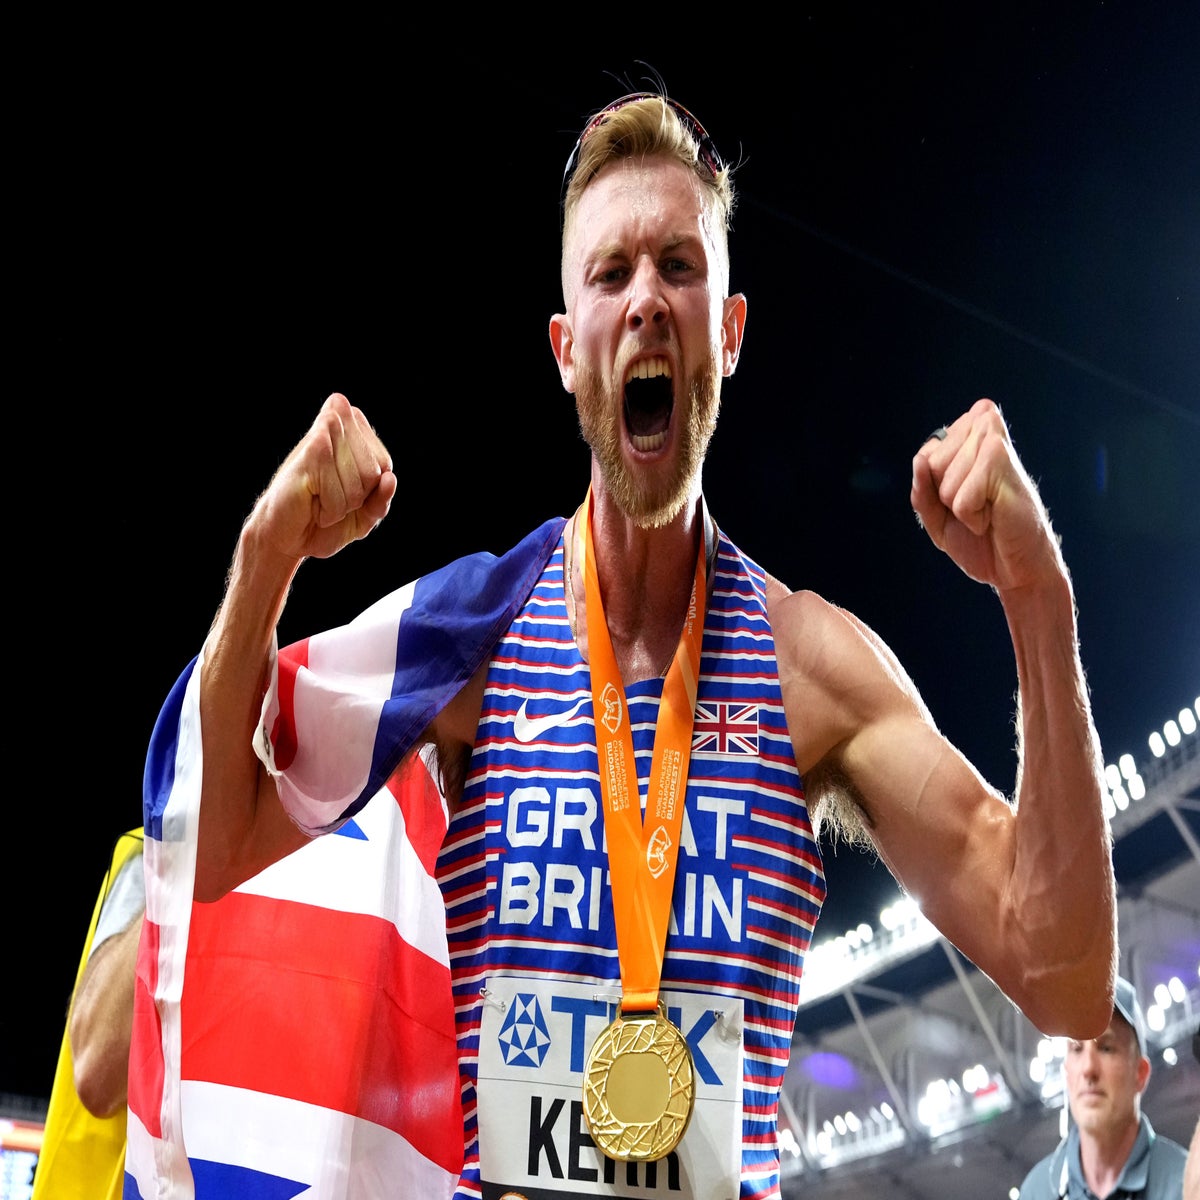 2023 World Athletics Championships: Relive the best moments